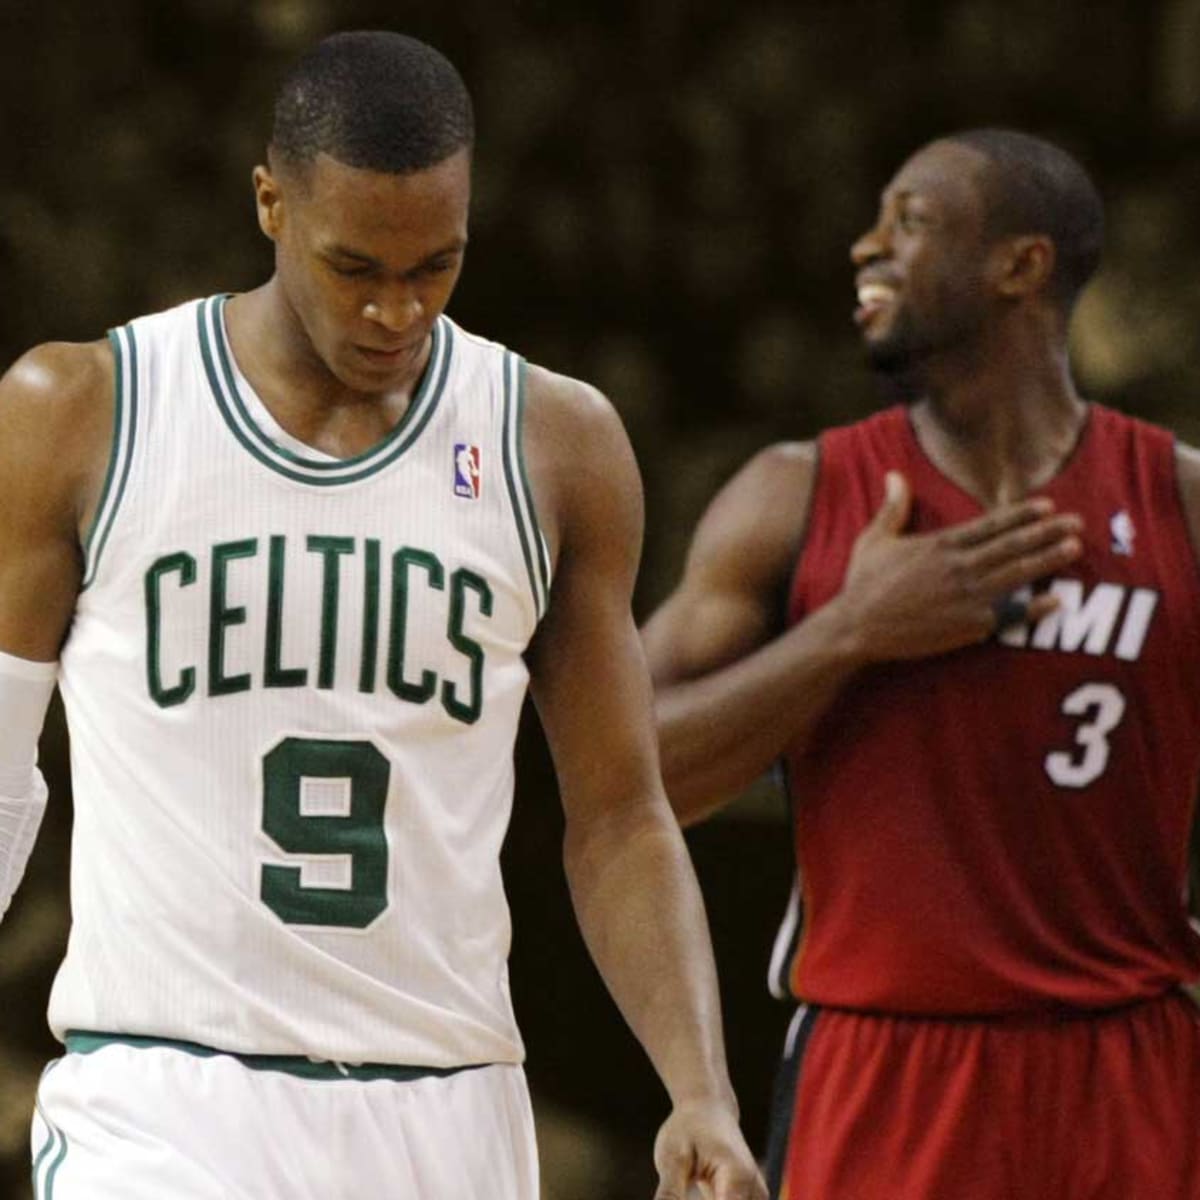 Rajon Rondo Comes In at No. 3 As We Count Down the Top 10 Players